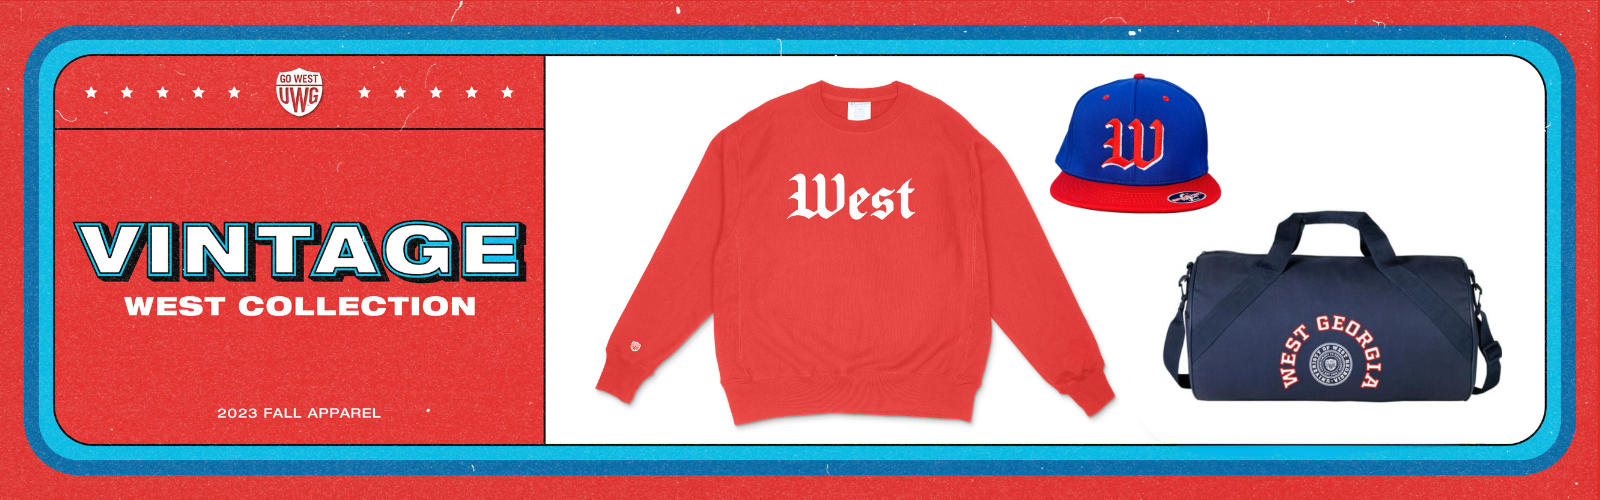 Vintage West 2023 Fall Apparel Collection. Banner shows a red crewneck, a hat, and a duffel bag.